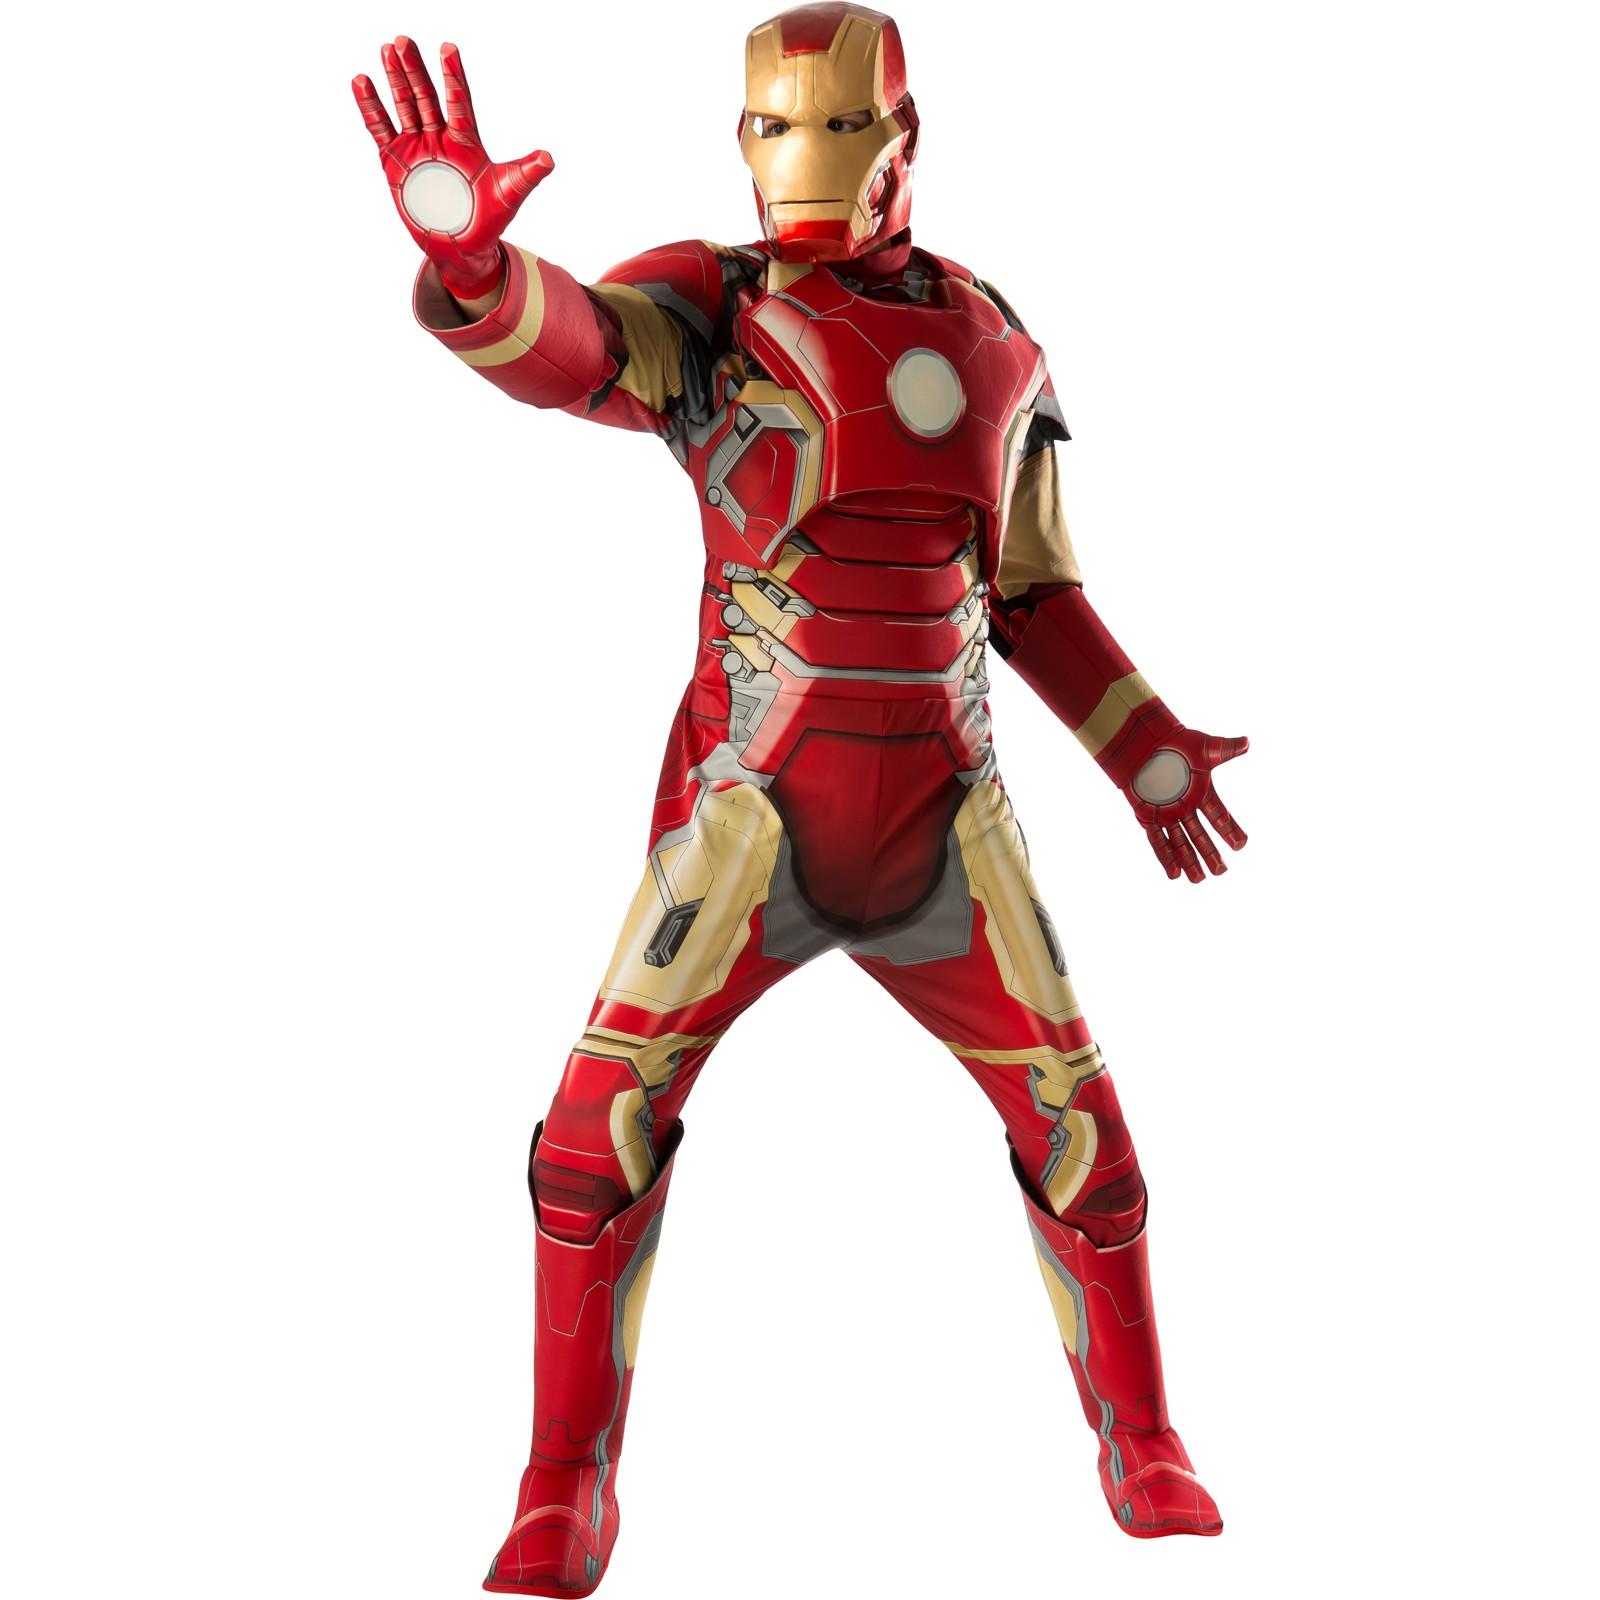 Avengers 2 - Age of Ultron: Deluxe Iron Man "Mark 43" Costume For ...